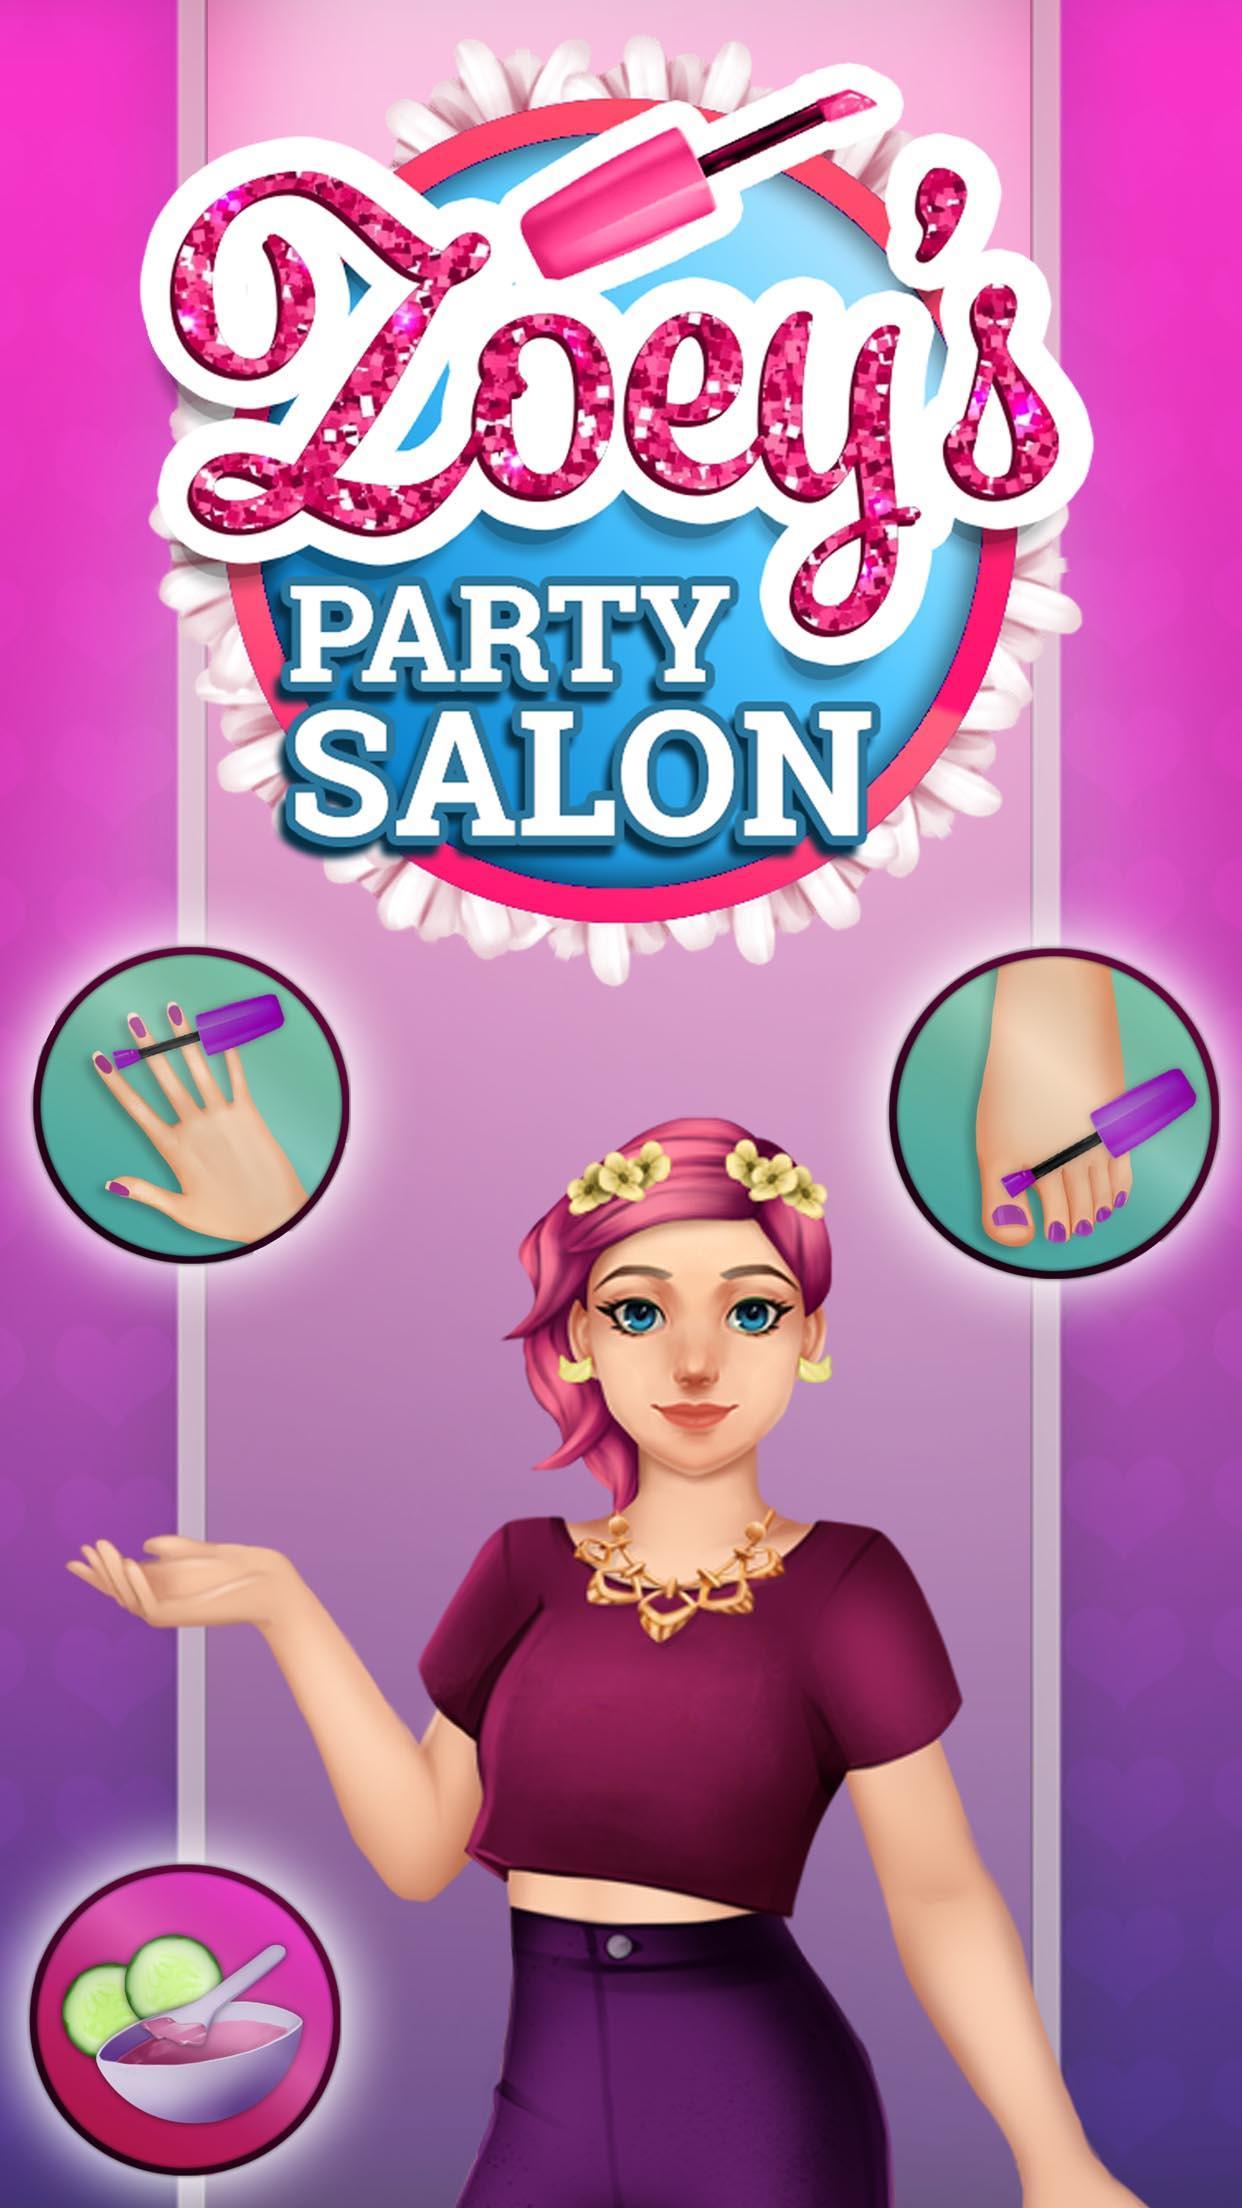 Screenshot 1 of Zoey's Party Salon - Ongles, maquillage, spa et habillage 1.0.23